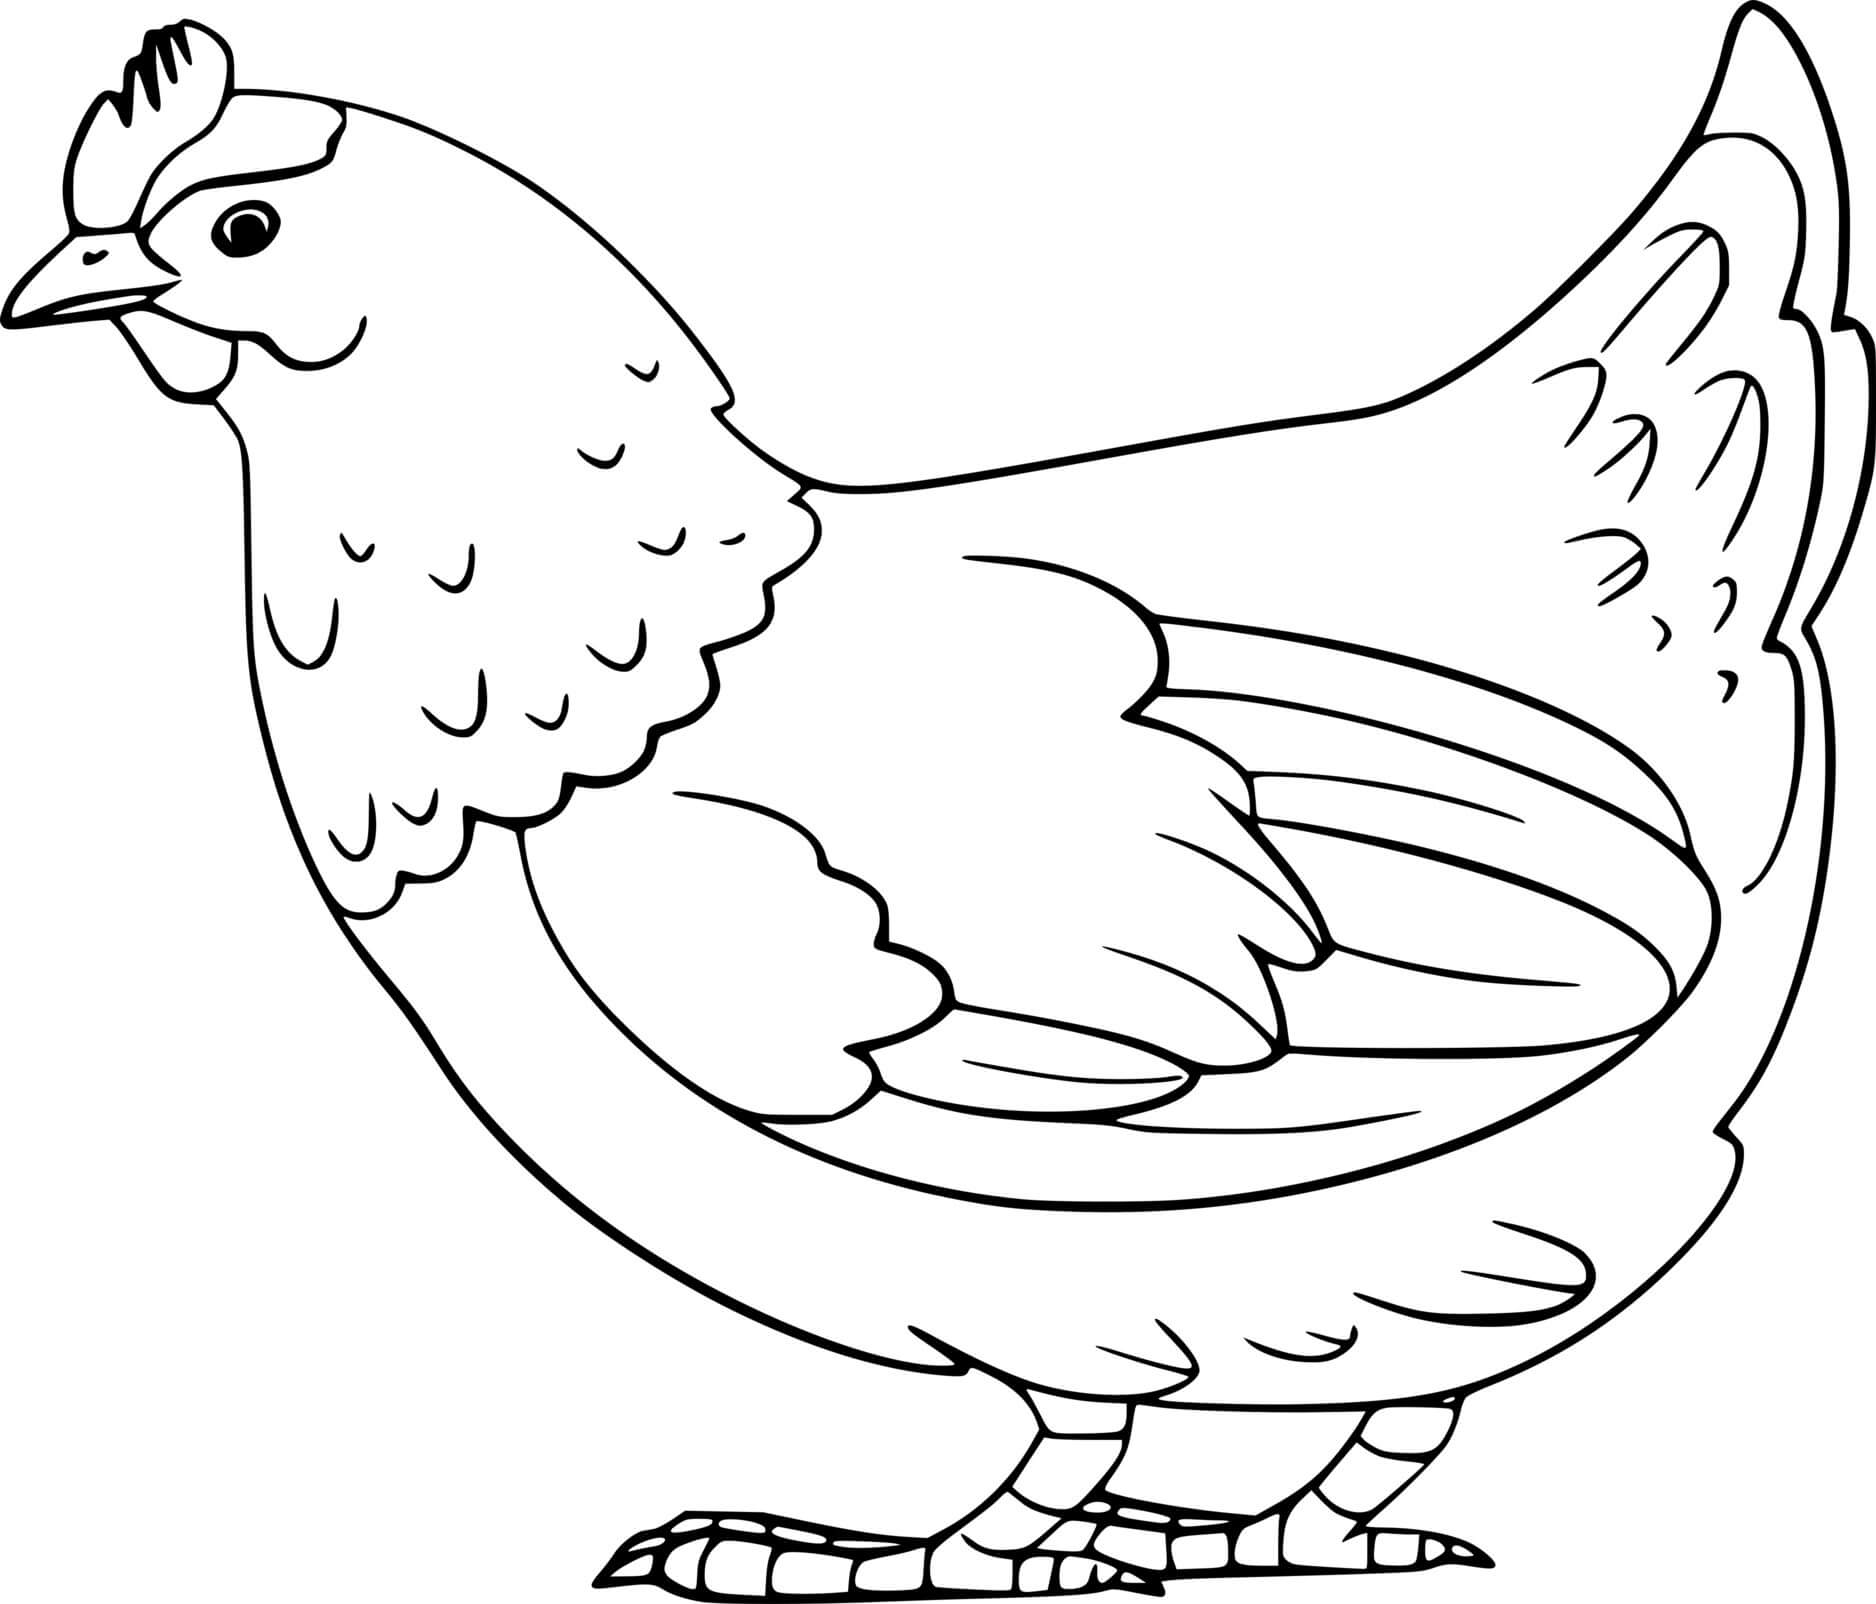 Easy Realistic Chicken Coloring Pages - Coloring Cool